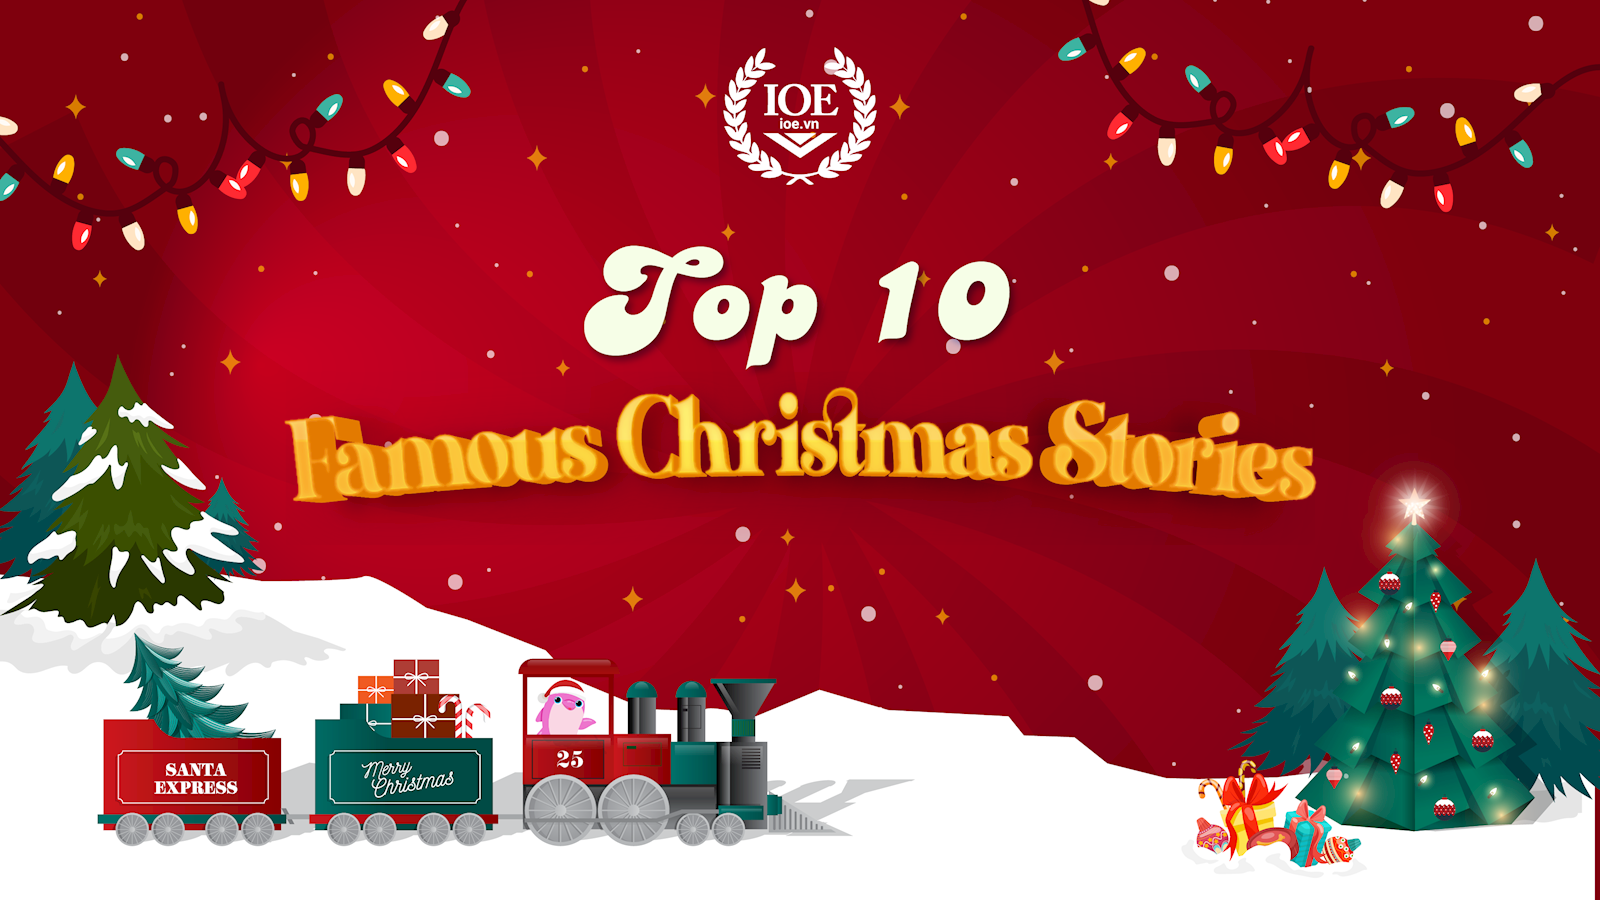 Top 10 Famous Christmas Stories 